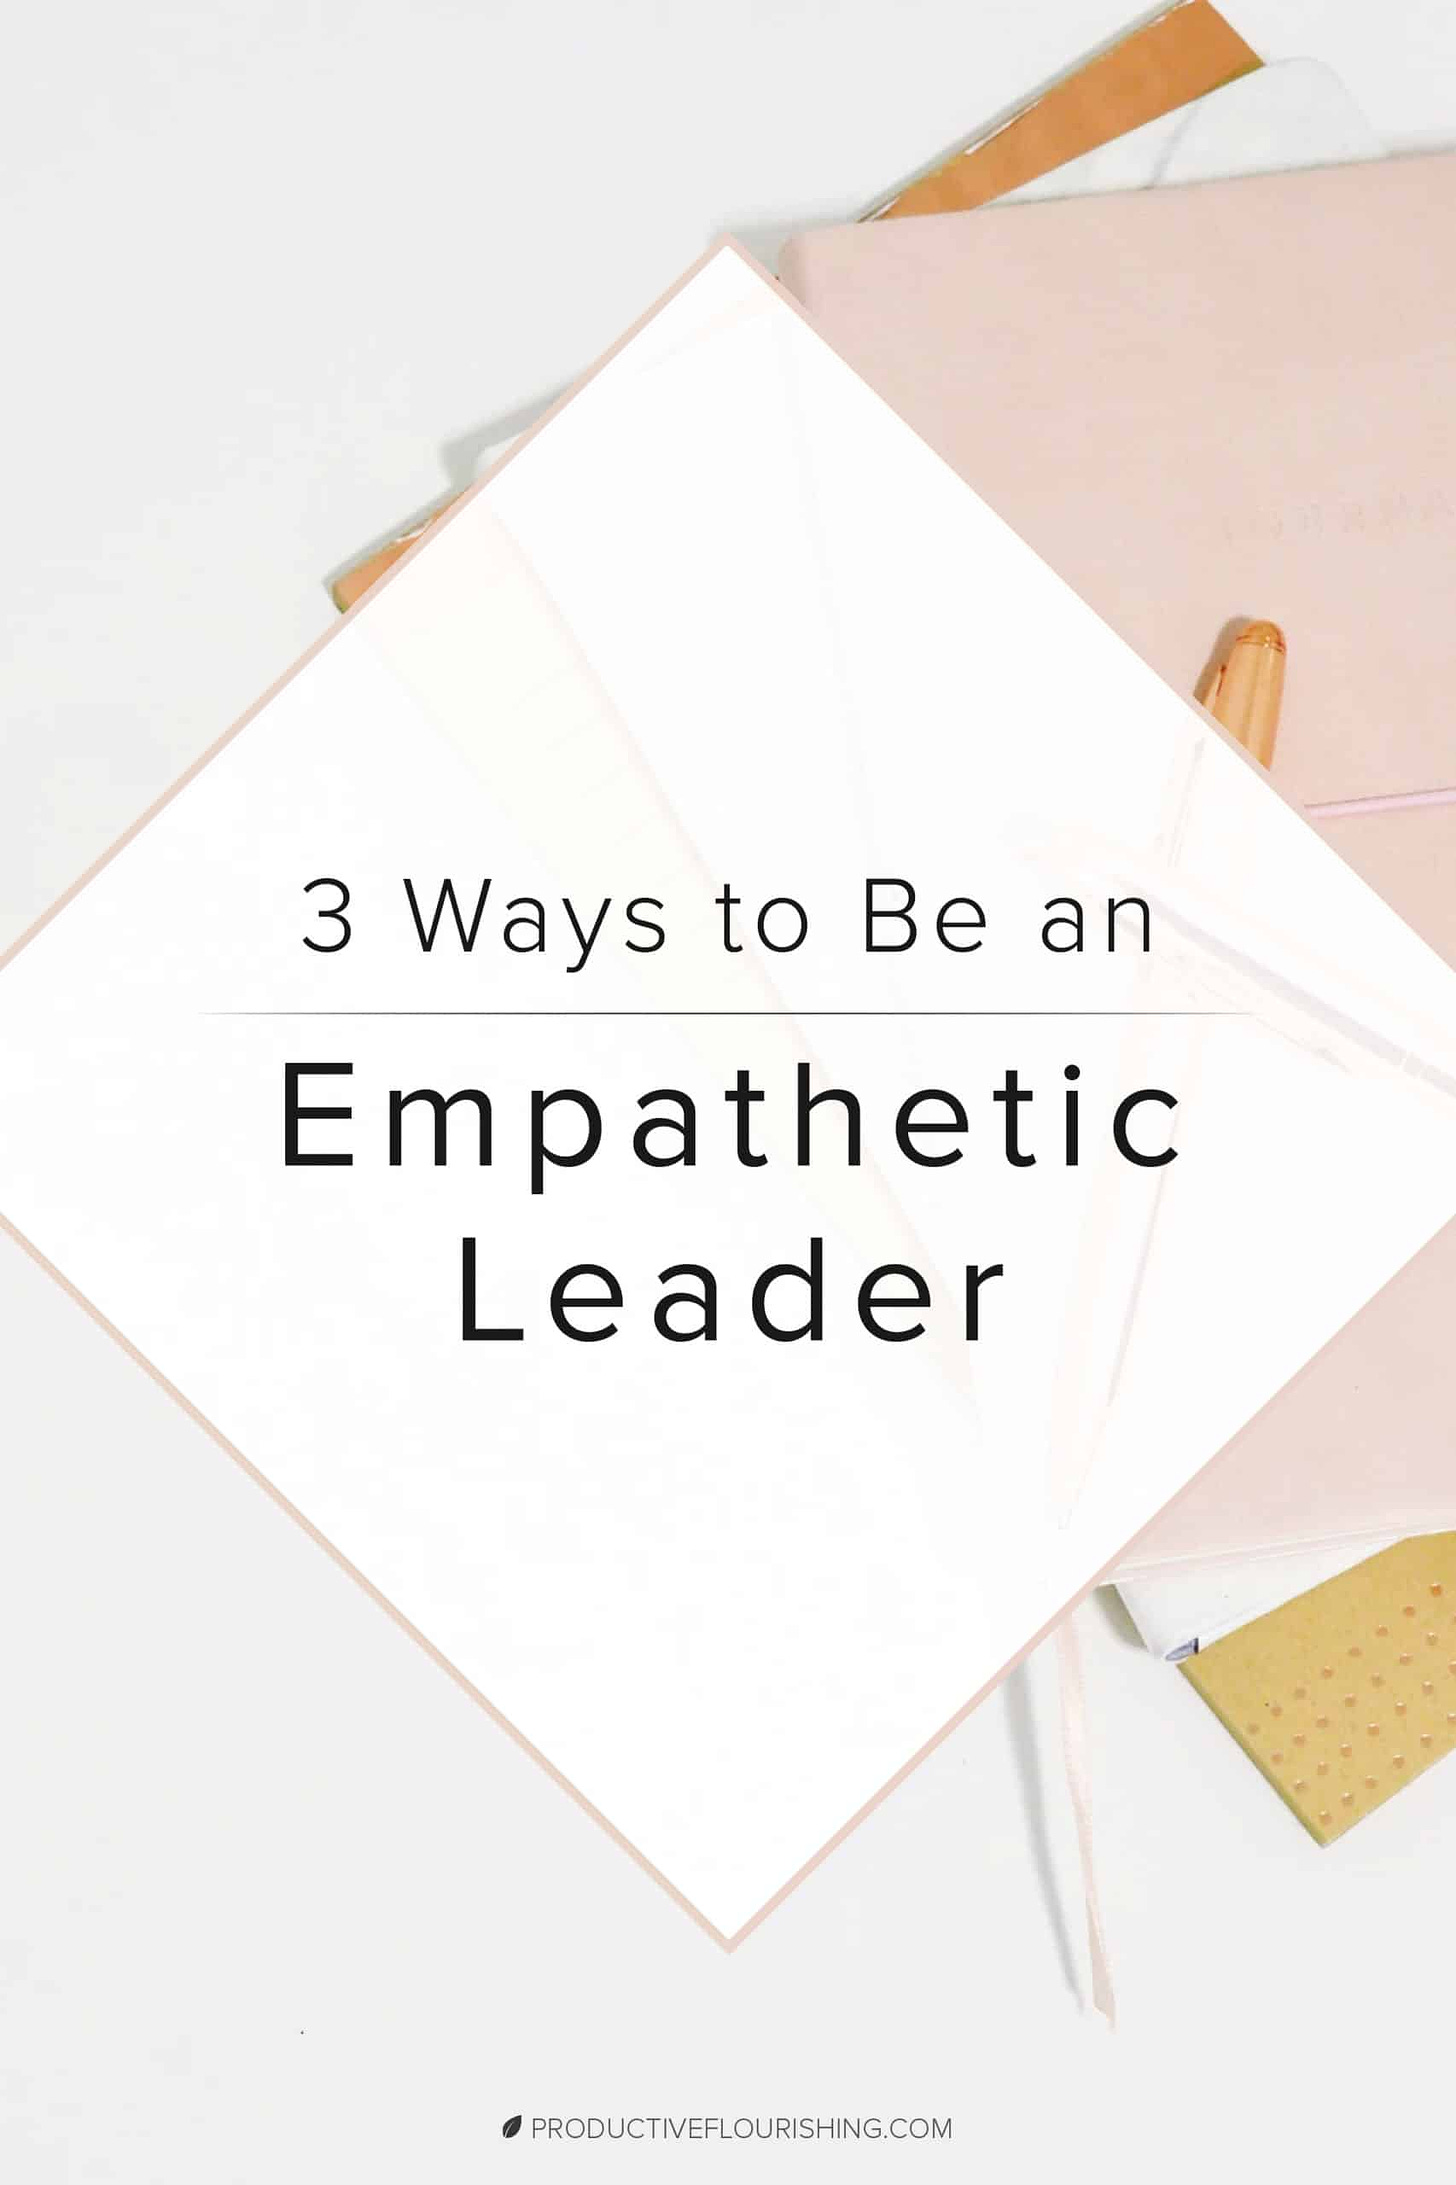 3 Ways to be an Empathetic Leader. Learn how leading with empathy makes you a better leader and leads to favorable results in your small business. Having a few Empathetic Leader techniques in your back pocket will help you avoid reactive problem-solving and preserve relationships with coworkers, team members, and collaborators. #leadershipskills #empathyinbusiness #productiveflourishing